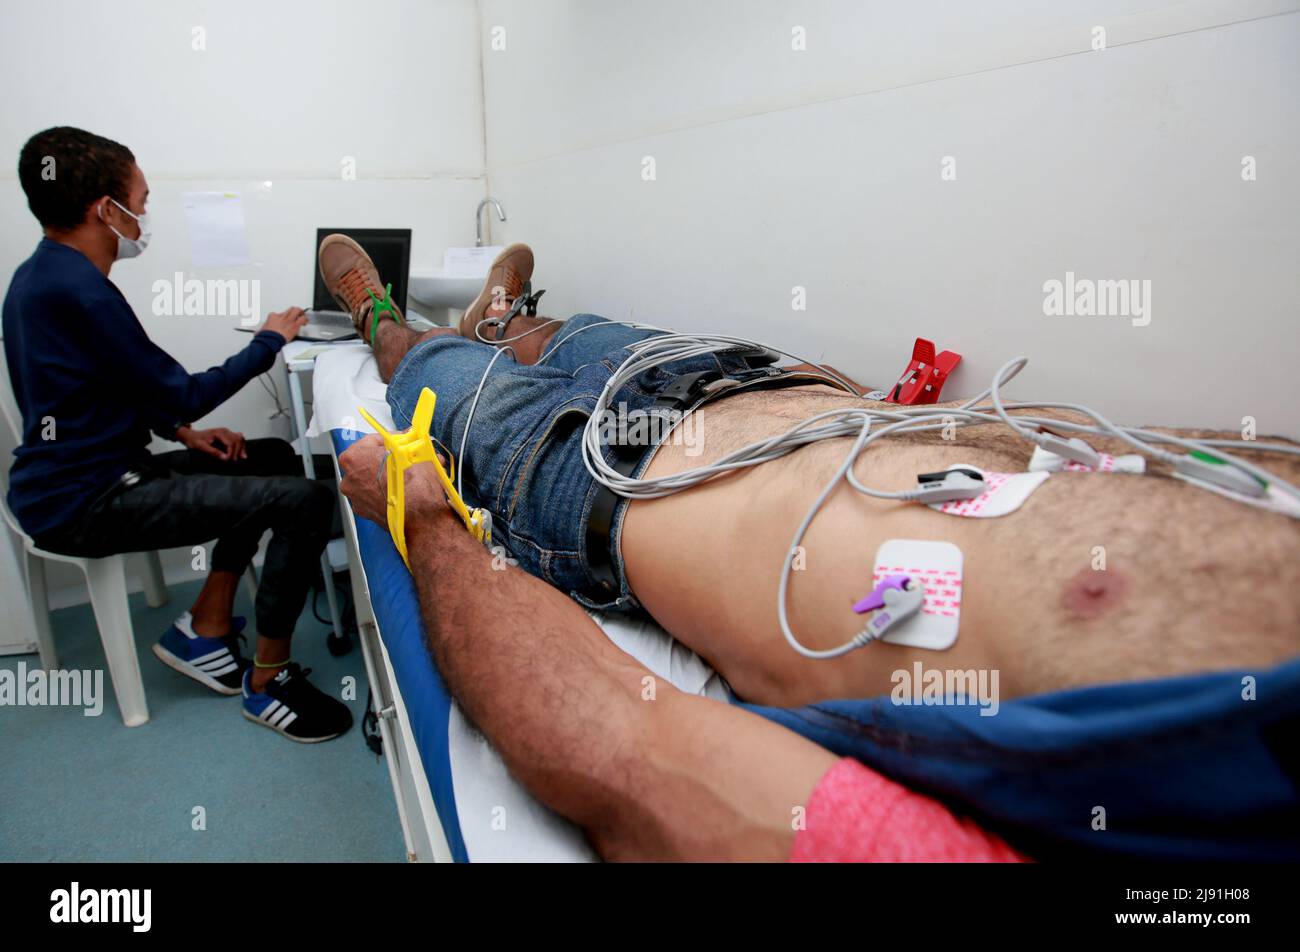 ibotirama, bahia, brazil - may 18, 2022: patient during an electrocardiogram exam in a public health program in the city of Ibotirama. Stock Photo